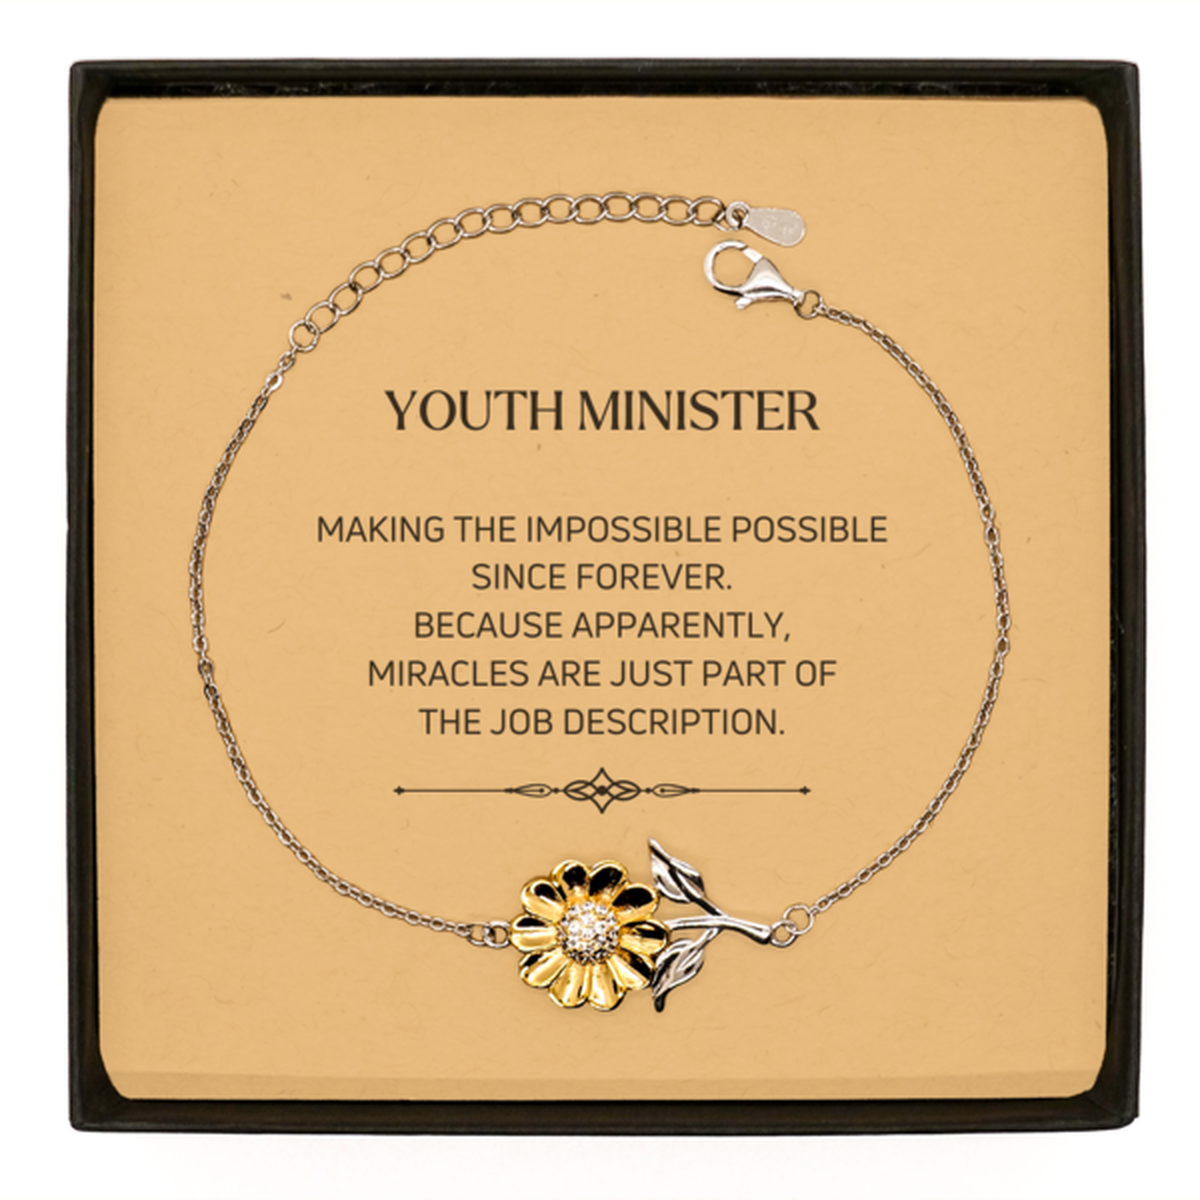 Funny Youth Minister Gifts, Miracles are just part of the job description, Inspirational Birthday Sunflower Bracelet For Youth Minister, Men, Women, Coworkers, Friends, Boss